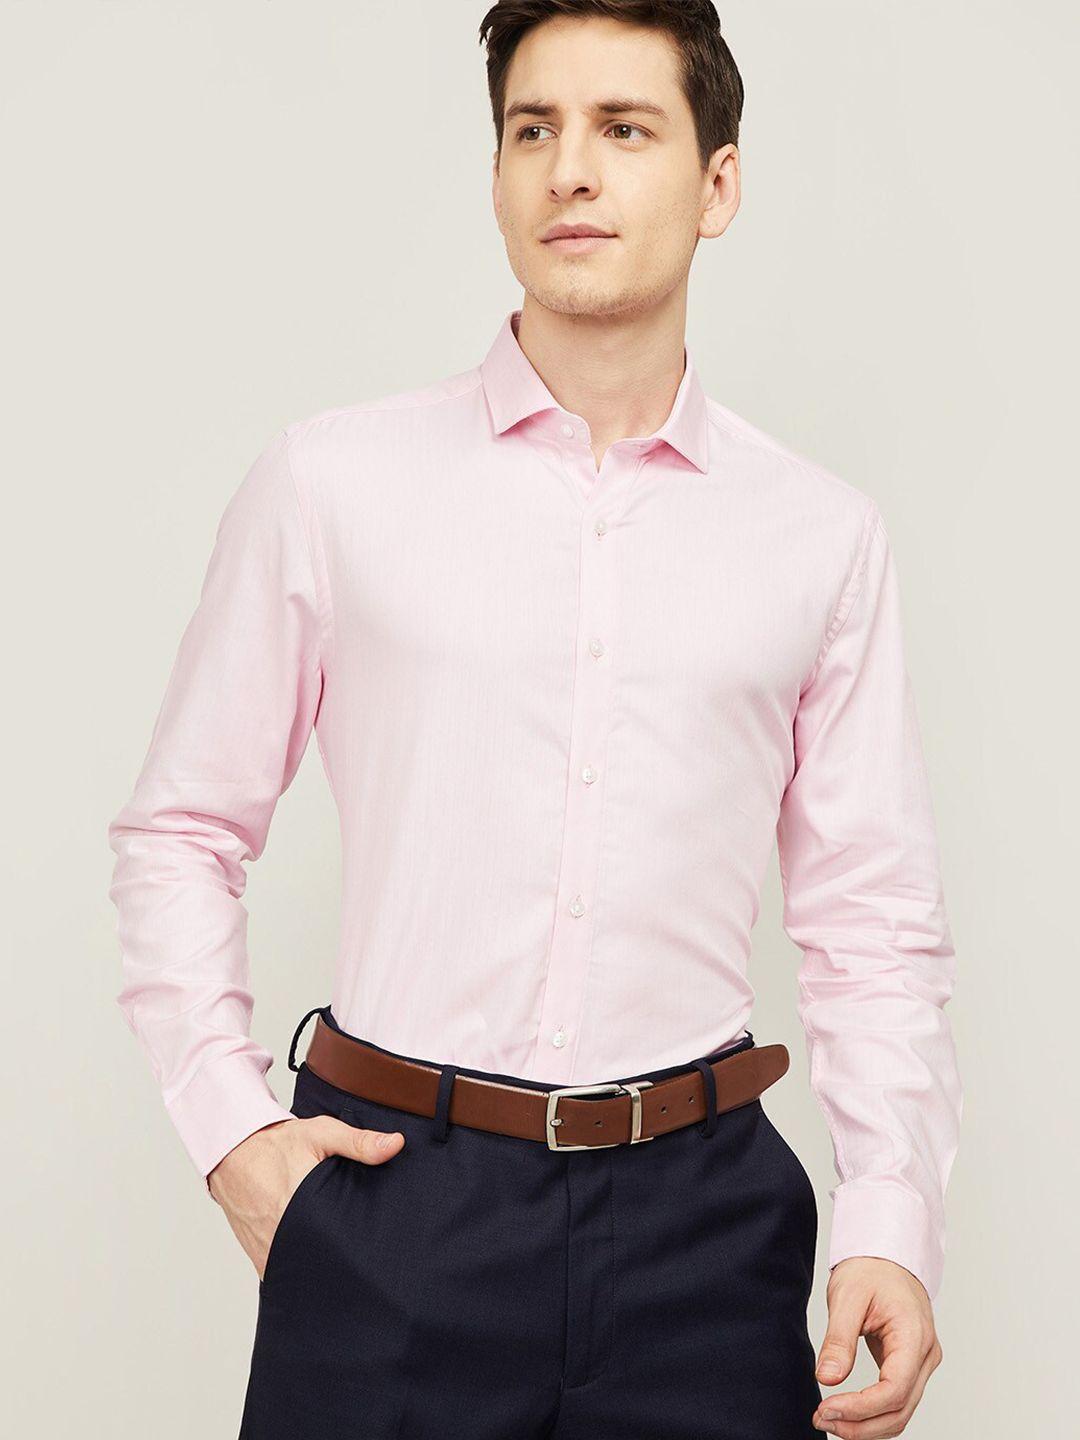 code by lifestyle men pink formal shirt